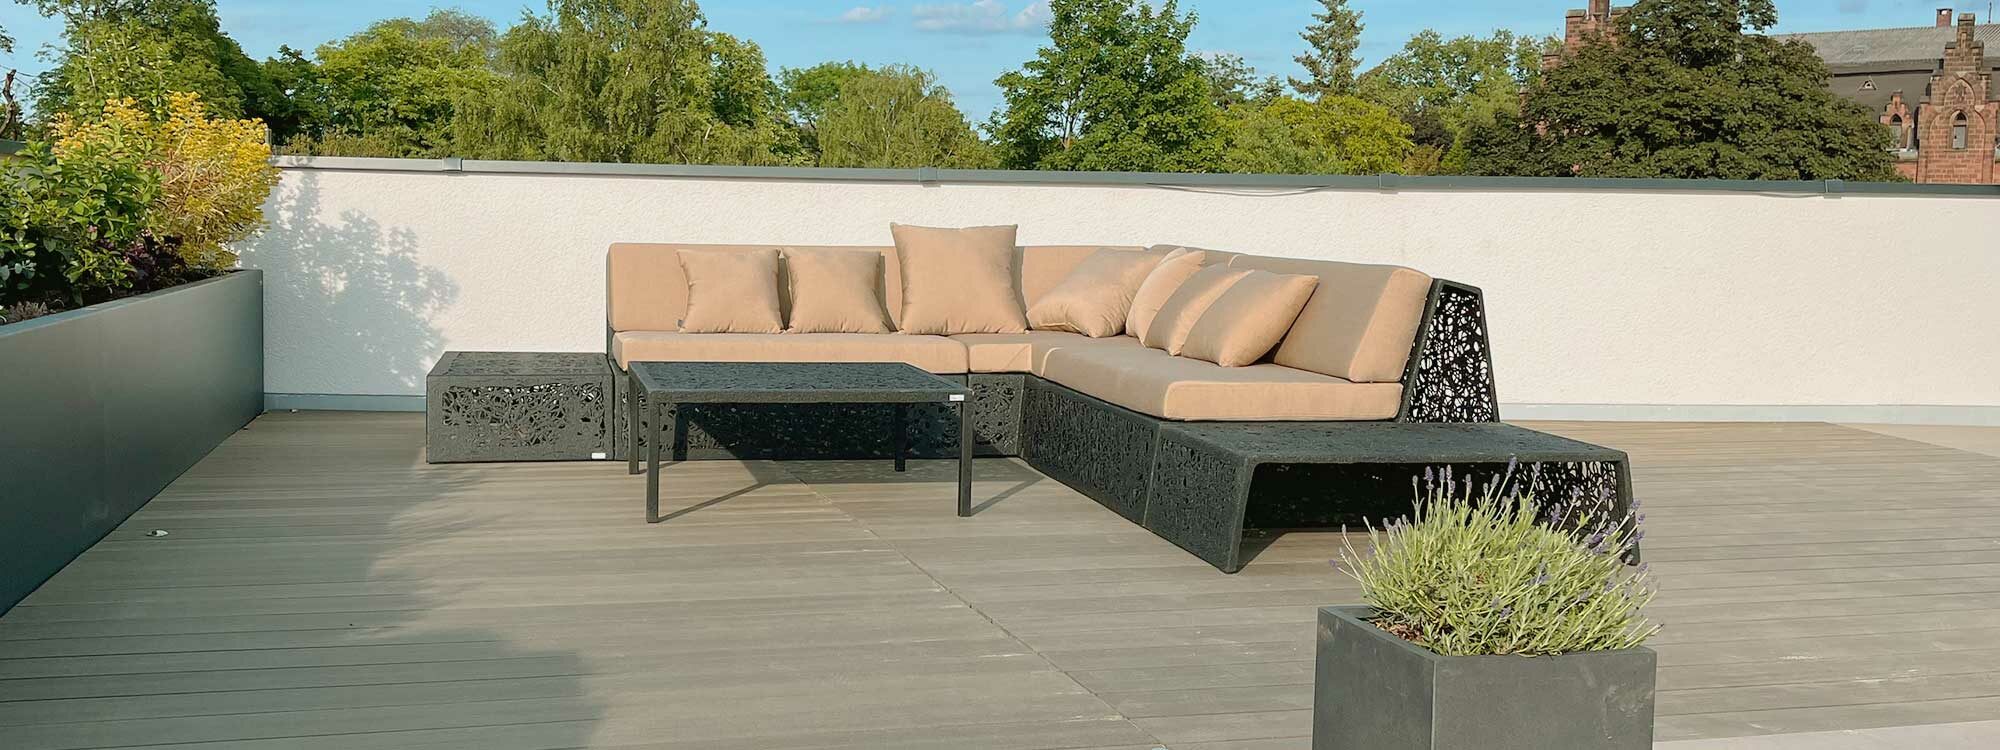 Image of Bios Lava Lounge outdoor corner sofa by Unknown Furniture, shown in rooftop with treetops and blue sky in the background